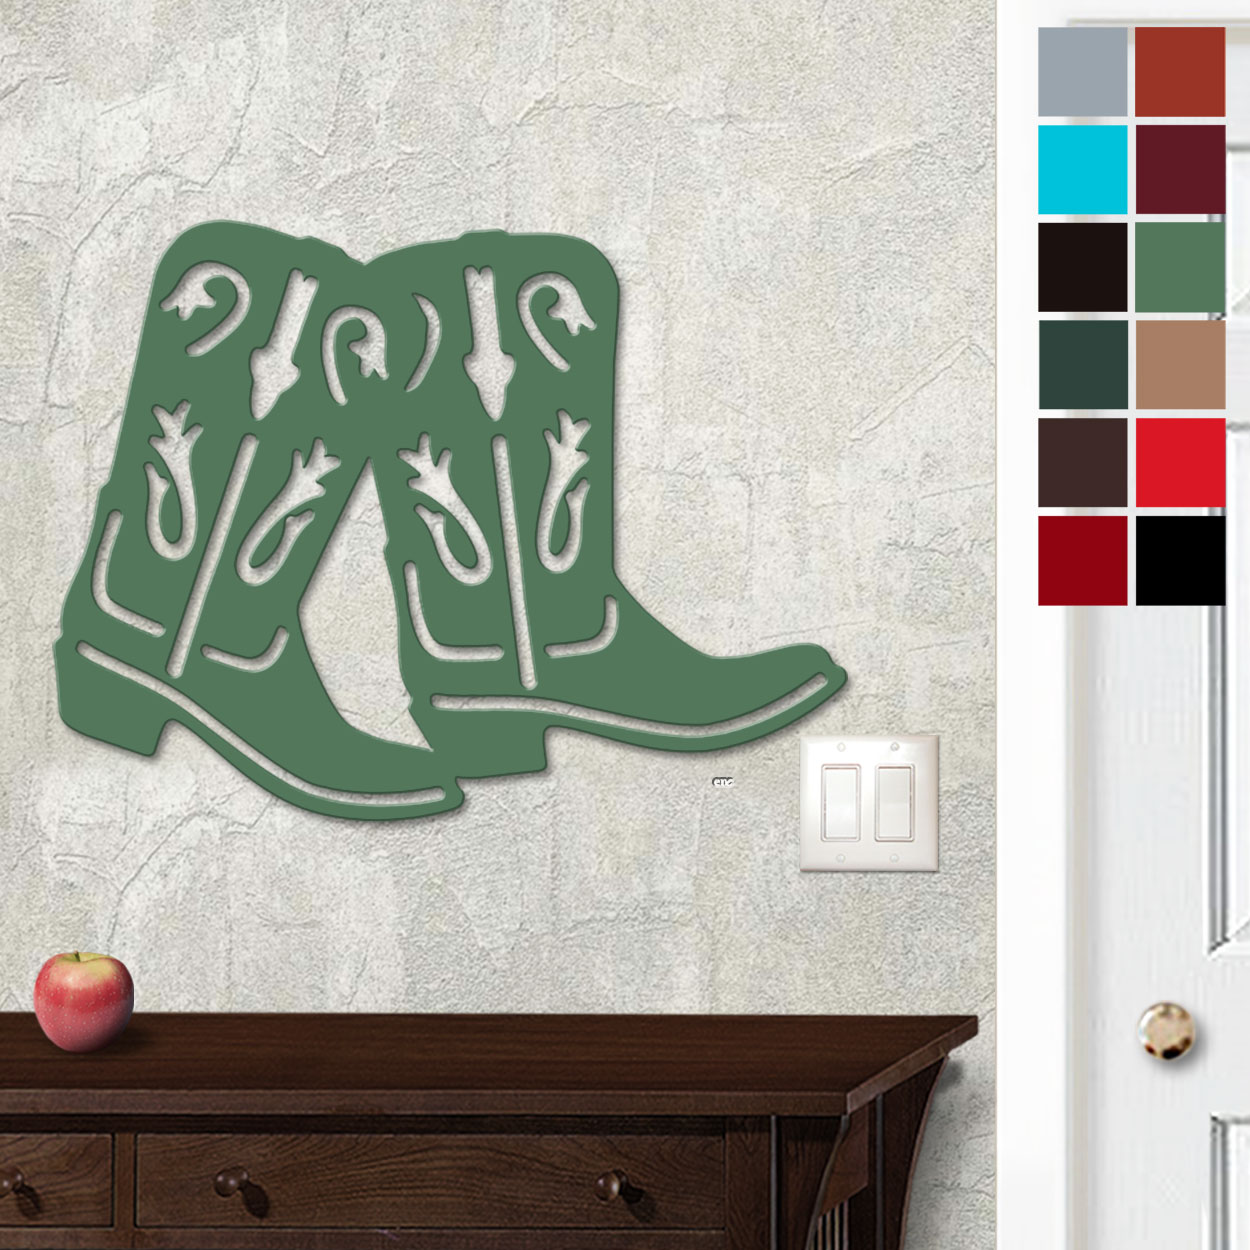 625005 - 18in or 24in Floating Metal Wall Art - Cowboy Boots - Choose Color